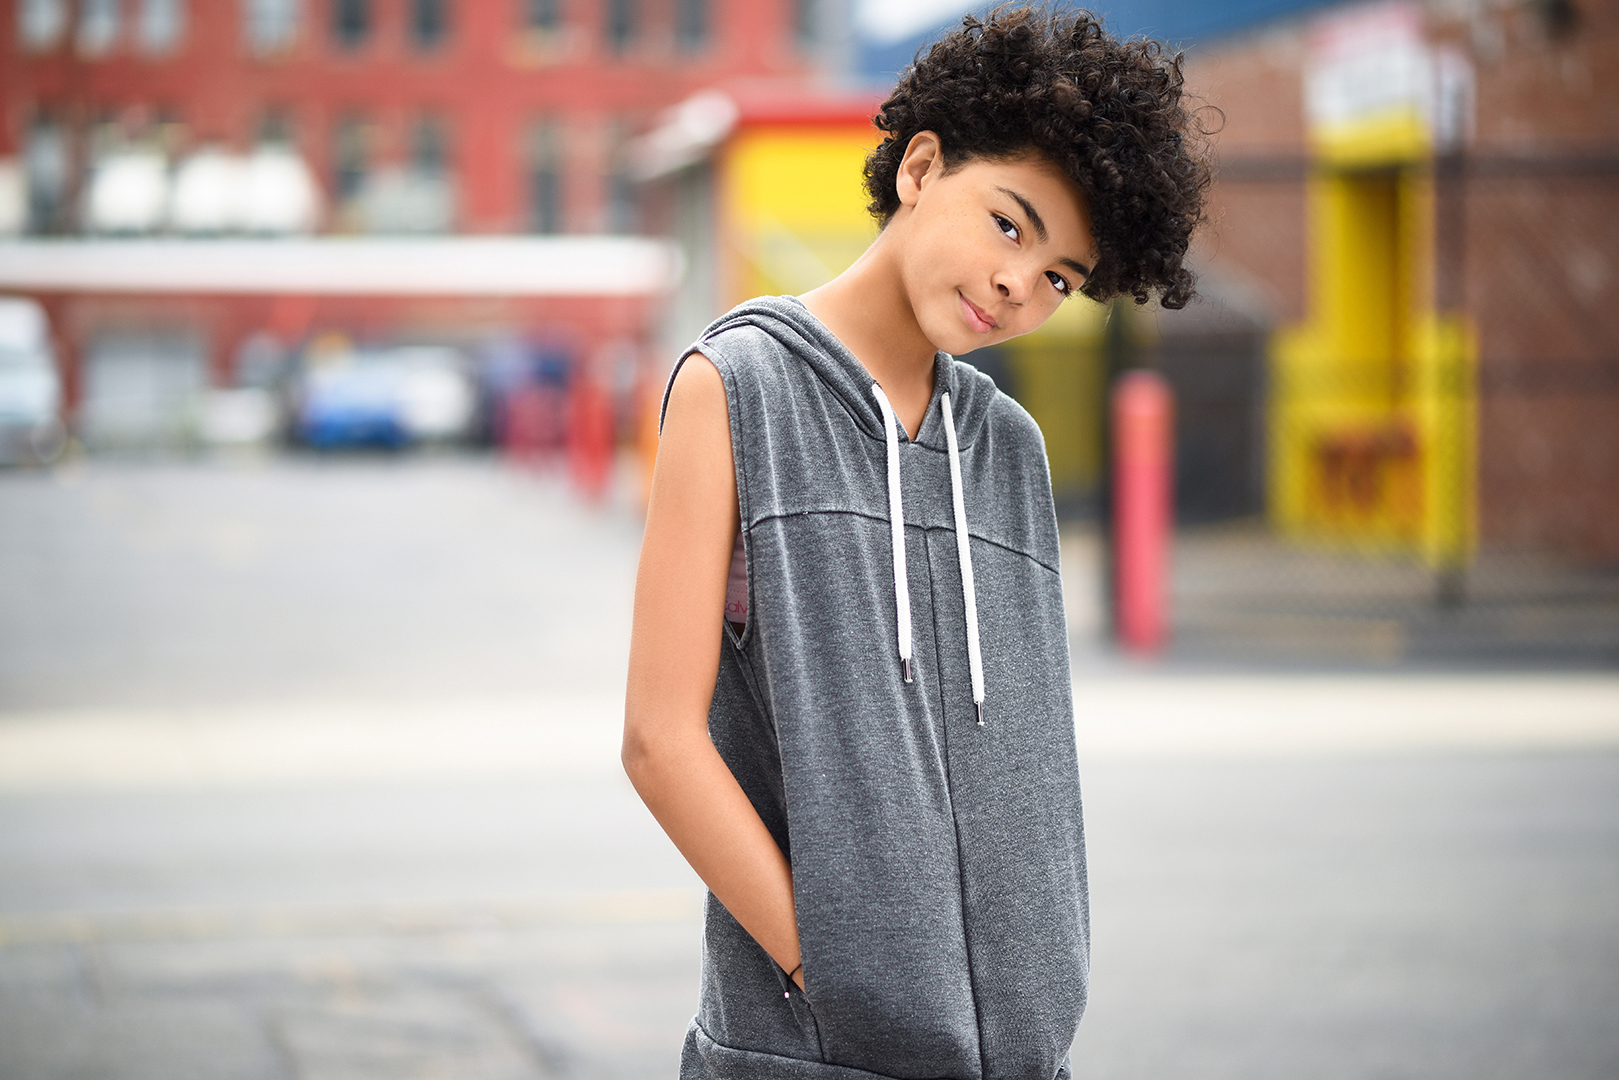 What to expect on your child's first model portfolio?